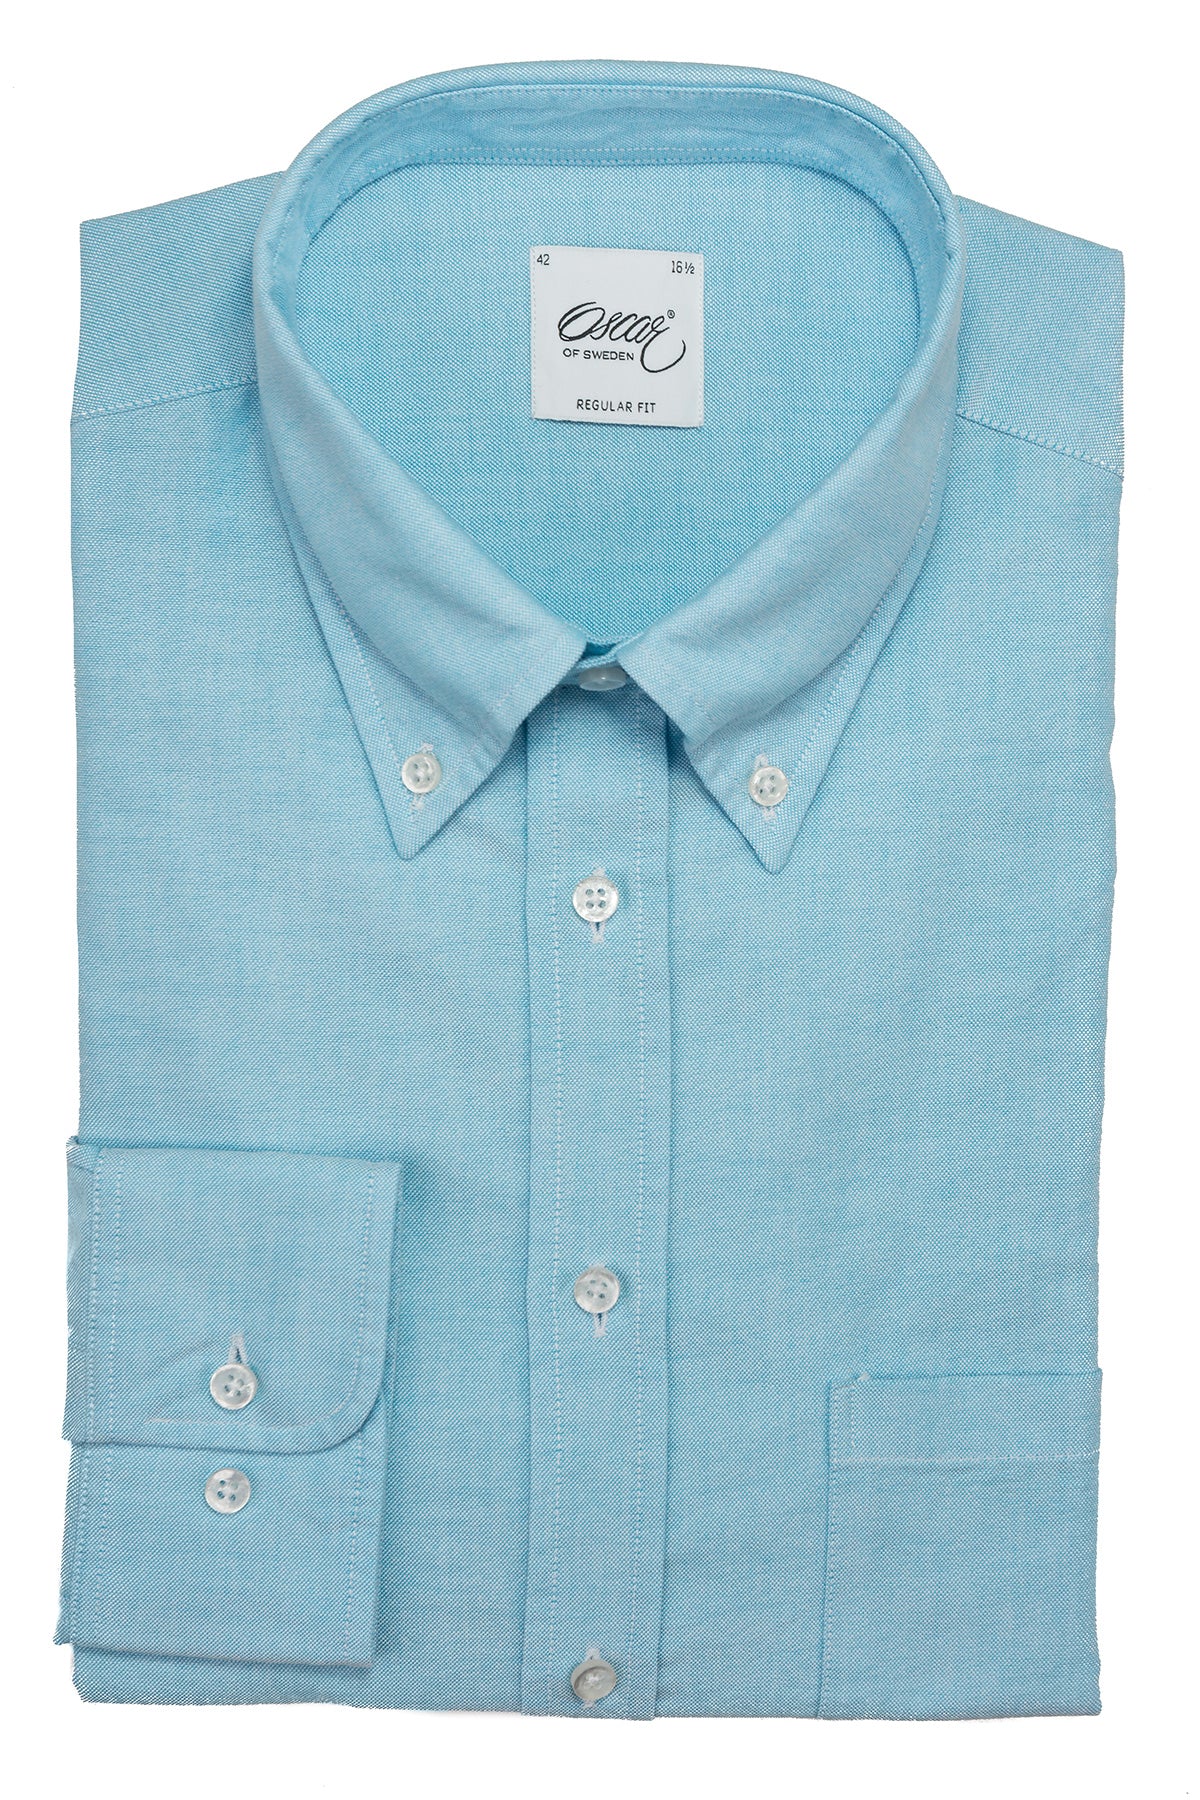 Turquoise button down oxford regular fit shirt